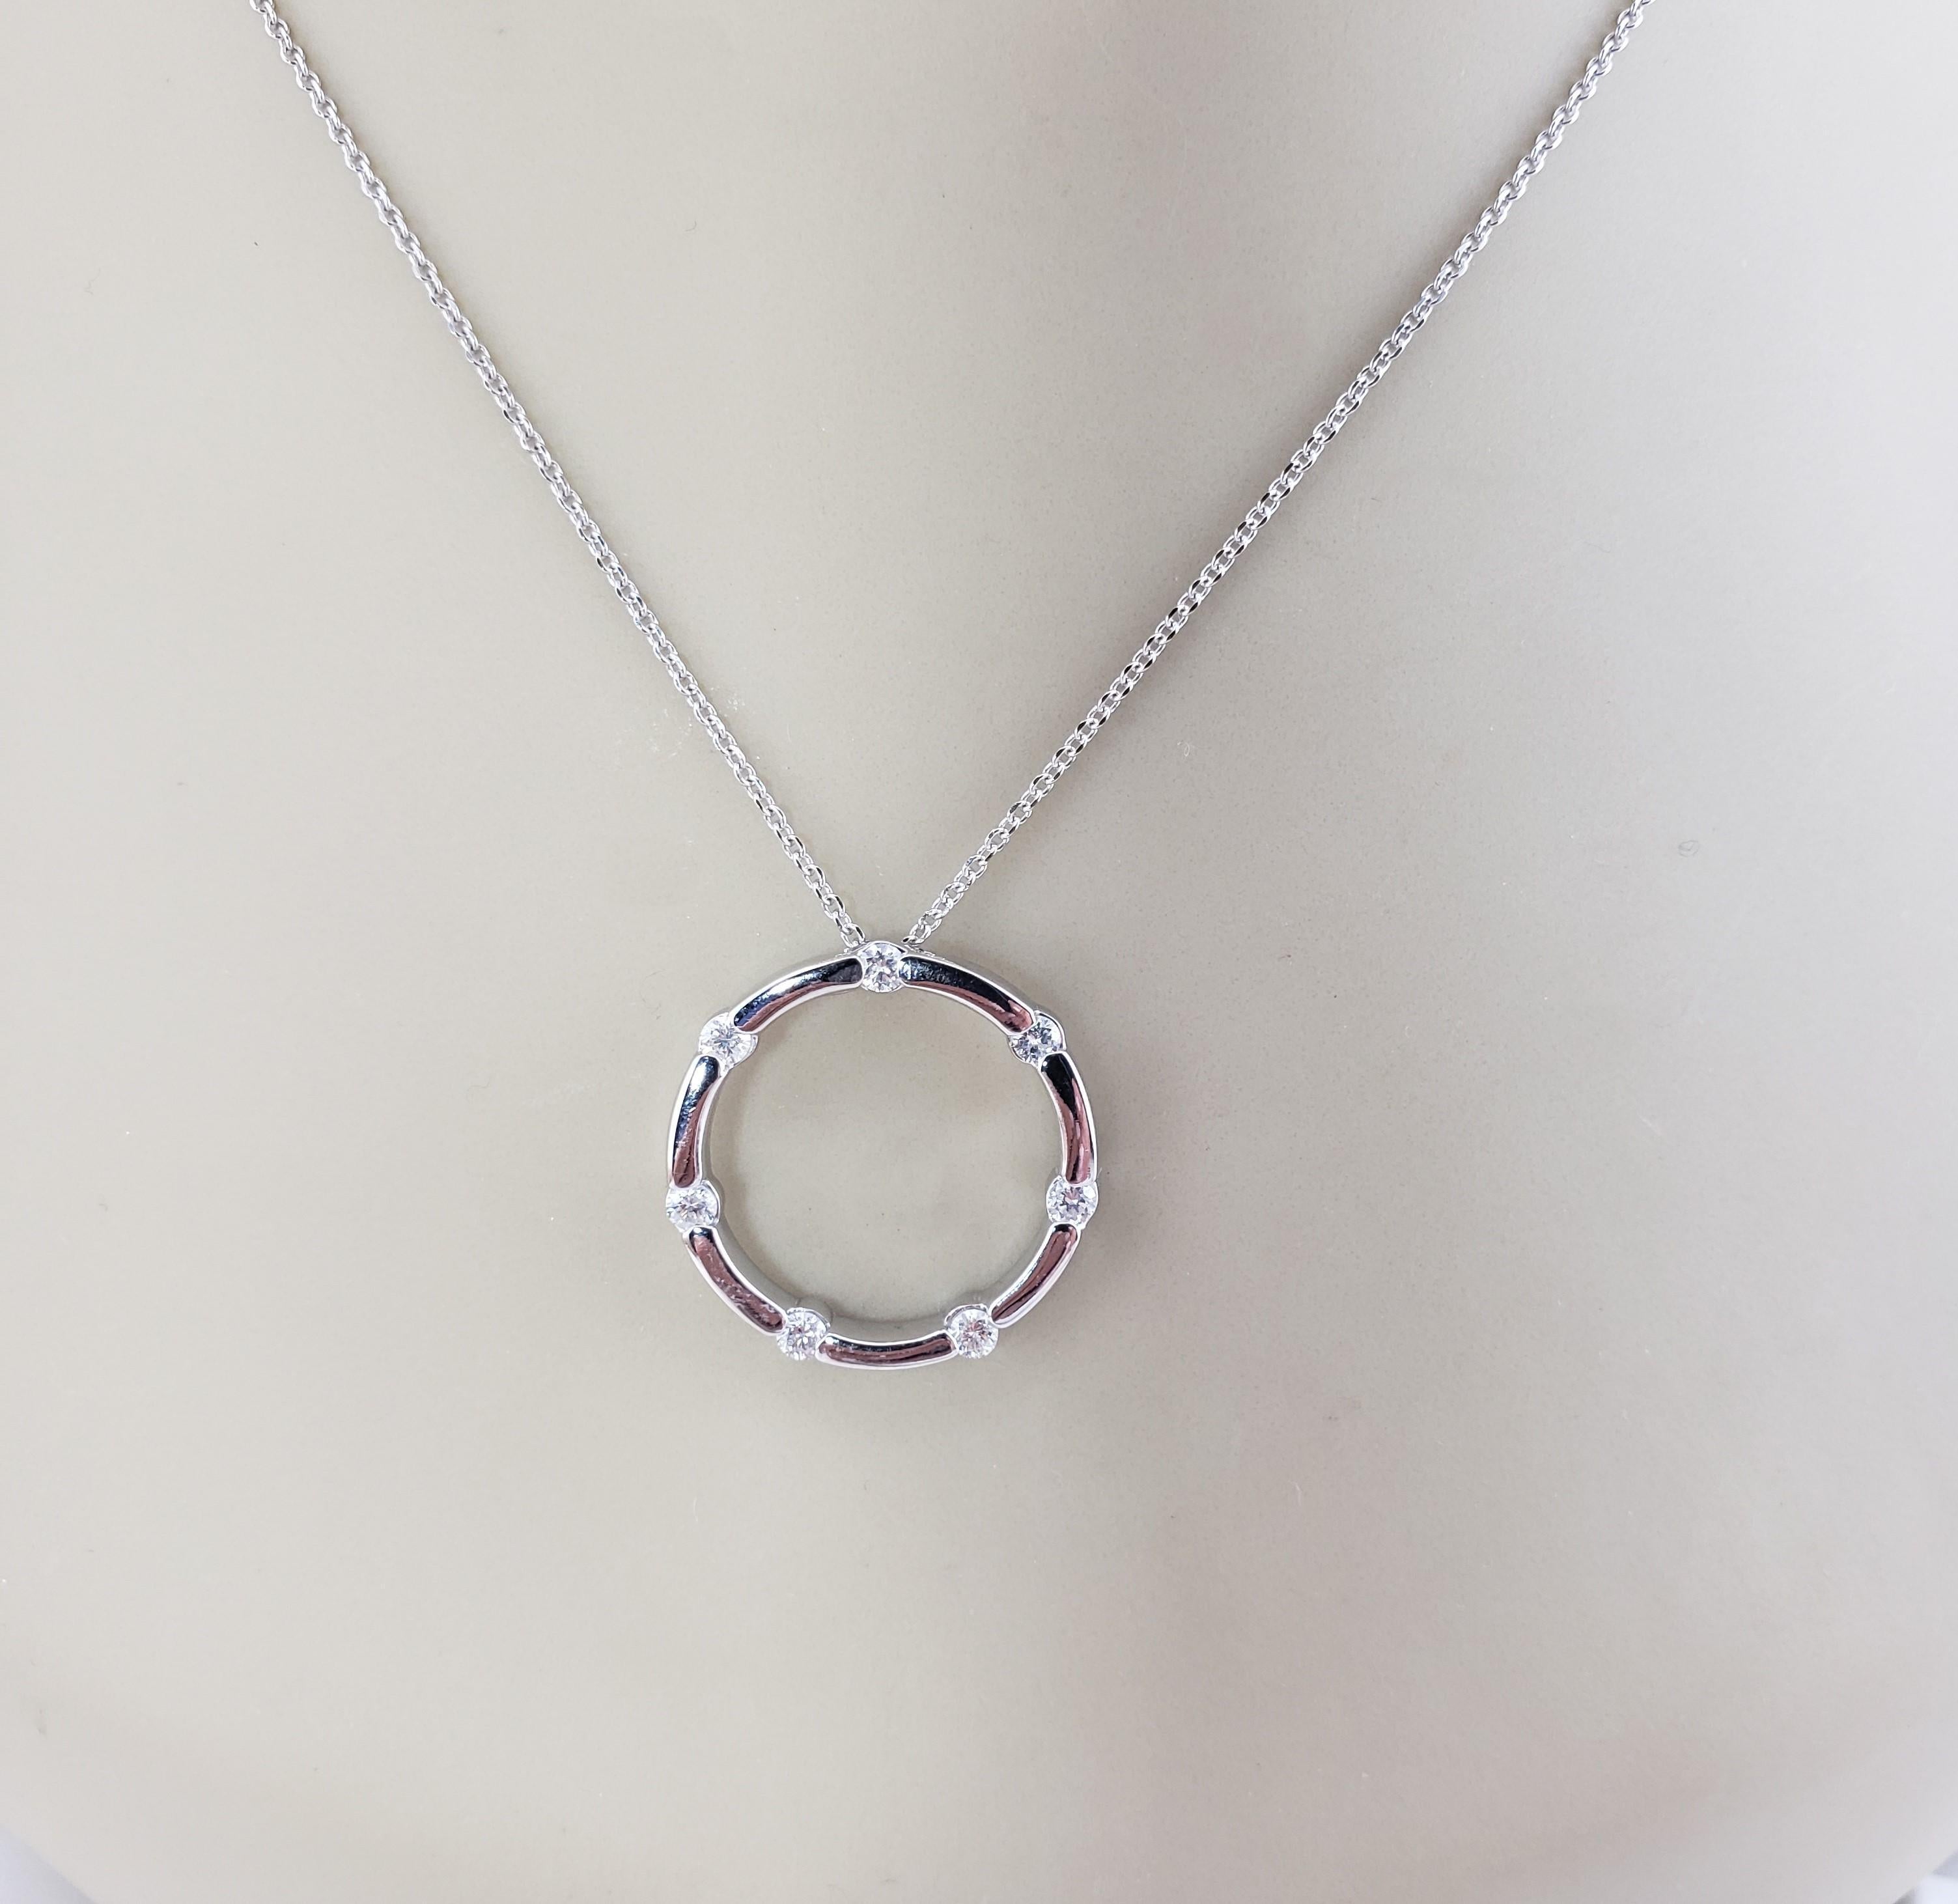 14 Karat White Gold and Diamond Circle Pendant Necklace #15493 For Sale 3